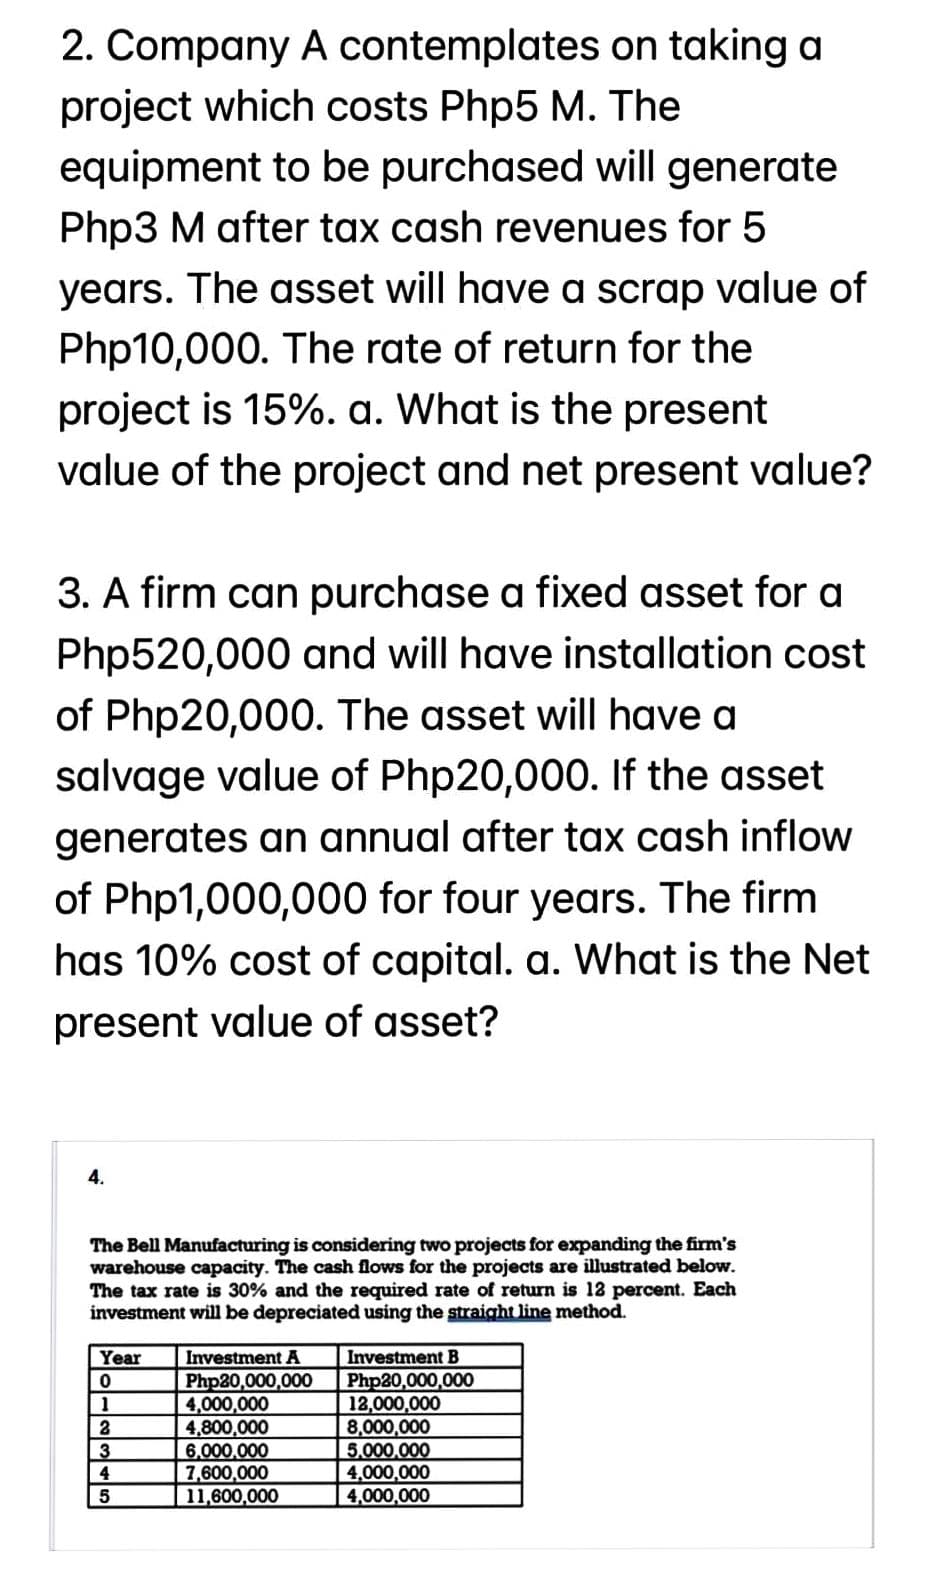 2. Company A contemplates on taking a
project which costs Php5 M. The
equipment to be purchased will generate
Php3 M after tax cash revenues for 5
years. The asset will have a scrap value of
Php10,000. The rate of return for the
project is 15%. a. What is the present
value of the project and net present value?
3. A firm can purchase a fixed asset for a
Php520,000 and will have installation cost
of Php20,000. The asset will have a
salvage value of Php20,000. If the asset
generates an annual after tax cash inflow
of Php1,000,000 for four years. The firm
has 10% cost of capital. a. What is the Net
present value of asset?
4.
The Bell Manufacturing is considering two projects for expanding the firm's
warehouse capacity. The cash flows for the projects are illustrated below.
The tax rate is 30% and the required rate of return is 12 percent. Each
investment will be depreciated using the straight line method.
Year
0
1
2
3
4
5
Investment A
Php20,000,000
4,000,000
4,800,000
6,000,000
7,600,000
11,600,000
Investment B
Php20,000,000
12,000,000
8,000,000
5,000,000
4,000,000
4,000,000